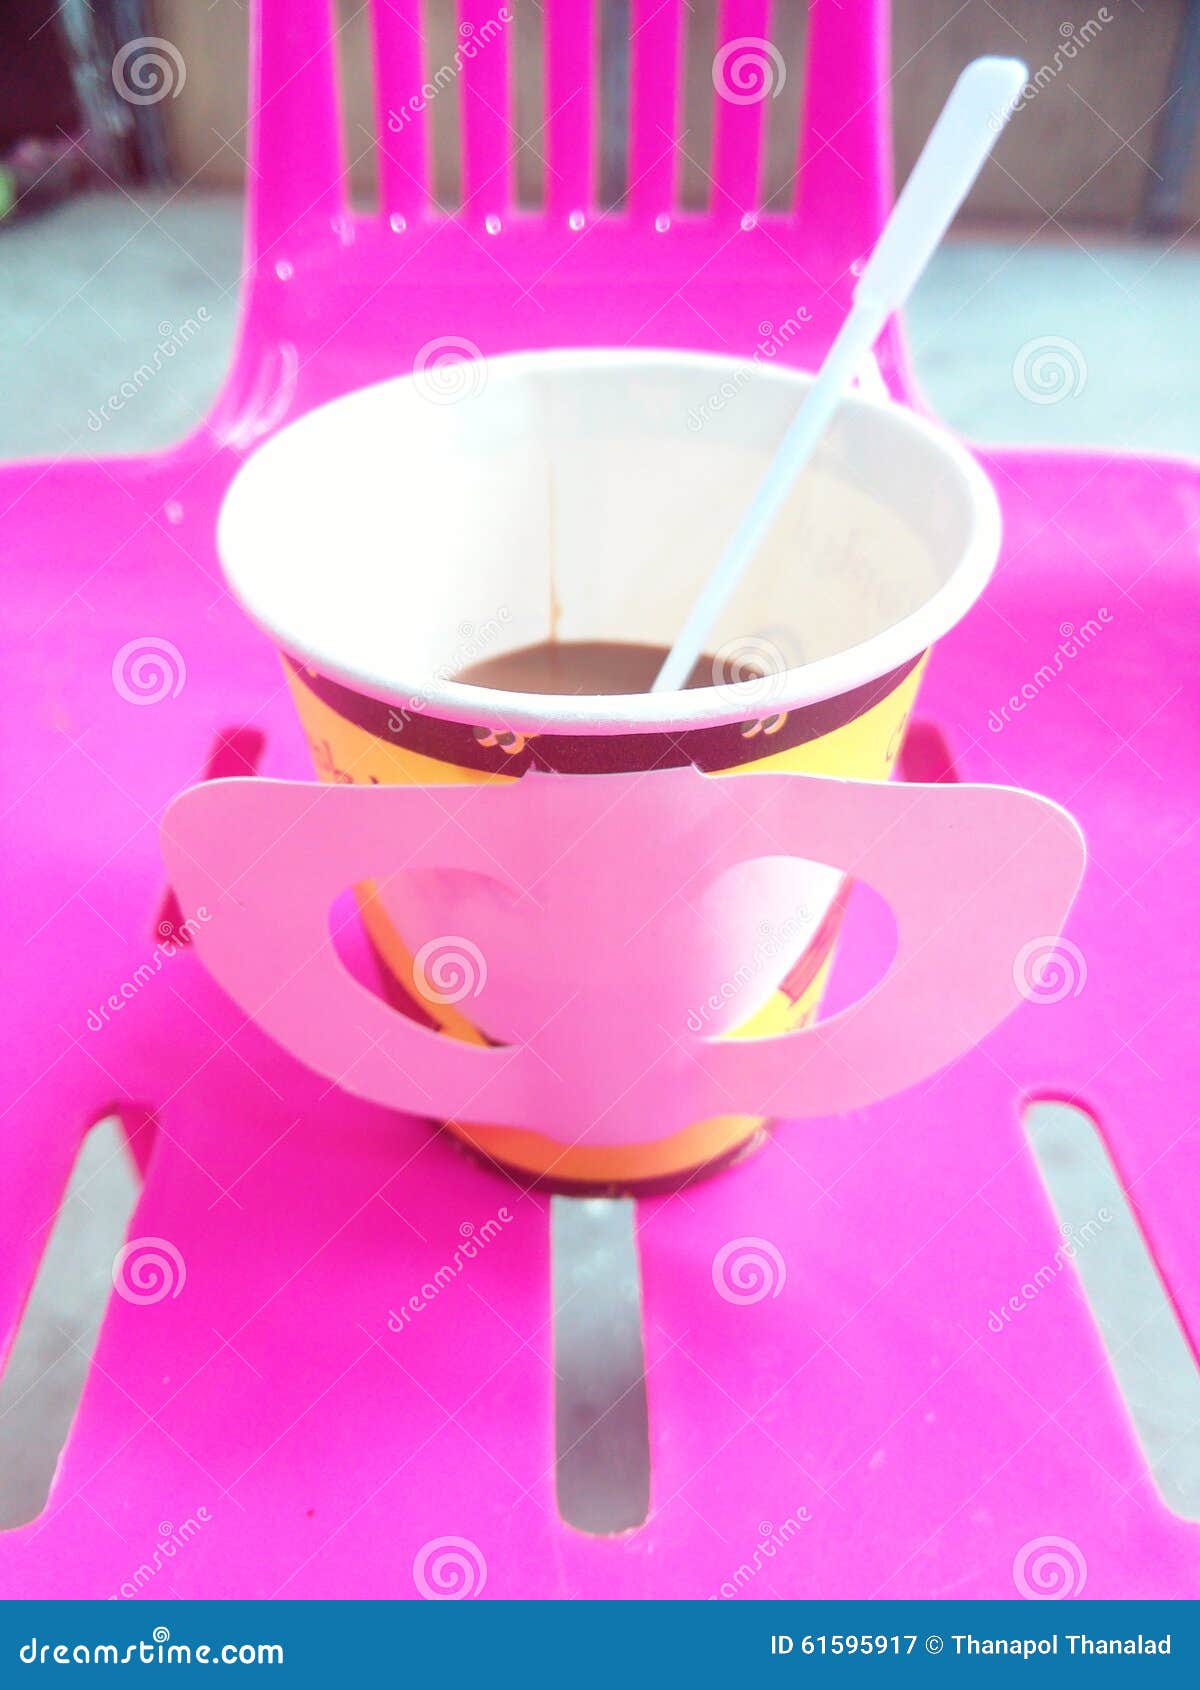 Quick coffee stock image. Image of simple, rerax, pink - 61595917